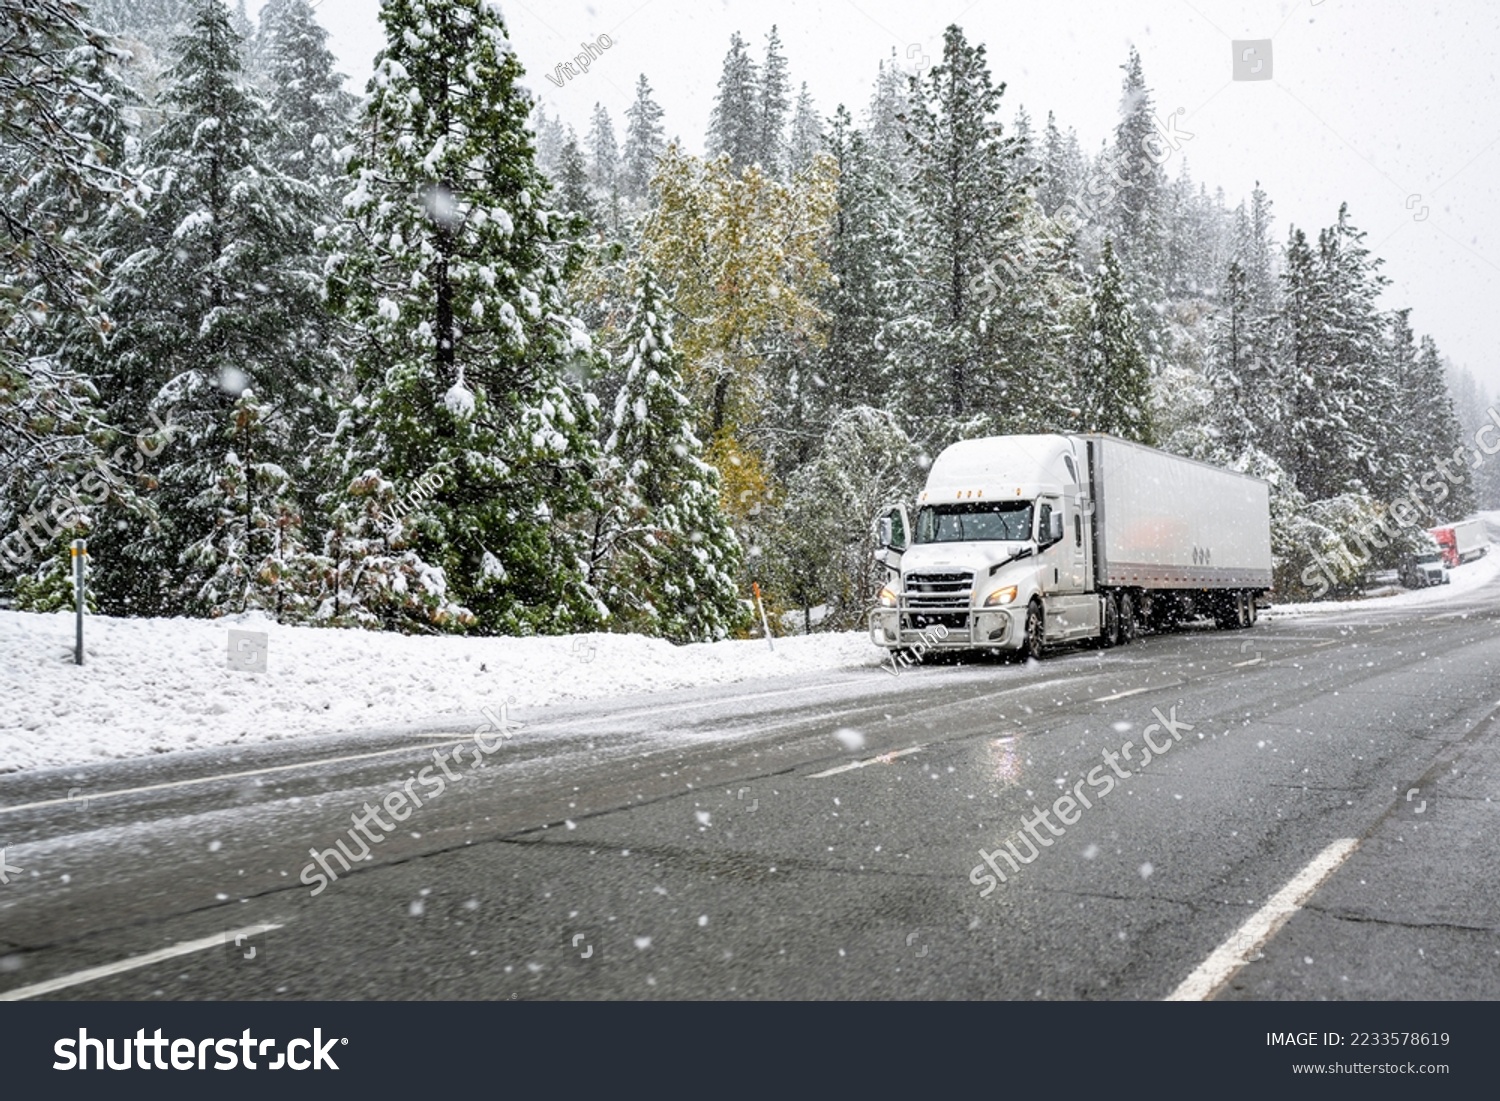 White big rig industrial semi truck with grille guard transporting cargo in dry van semi trailer standing on road shoulder of a winter highway during a snow storm near Shasta Lake in California #2233578619